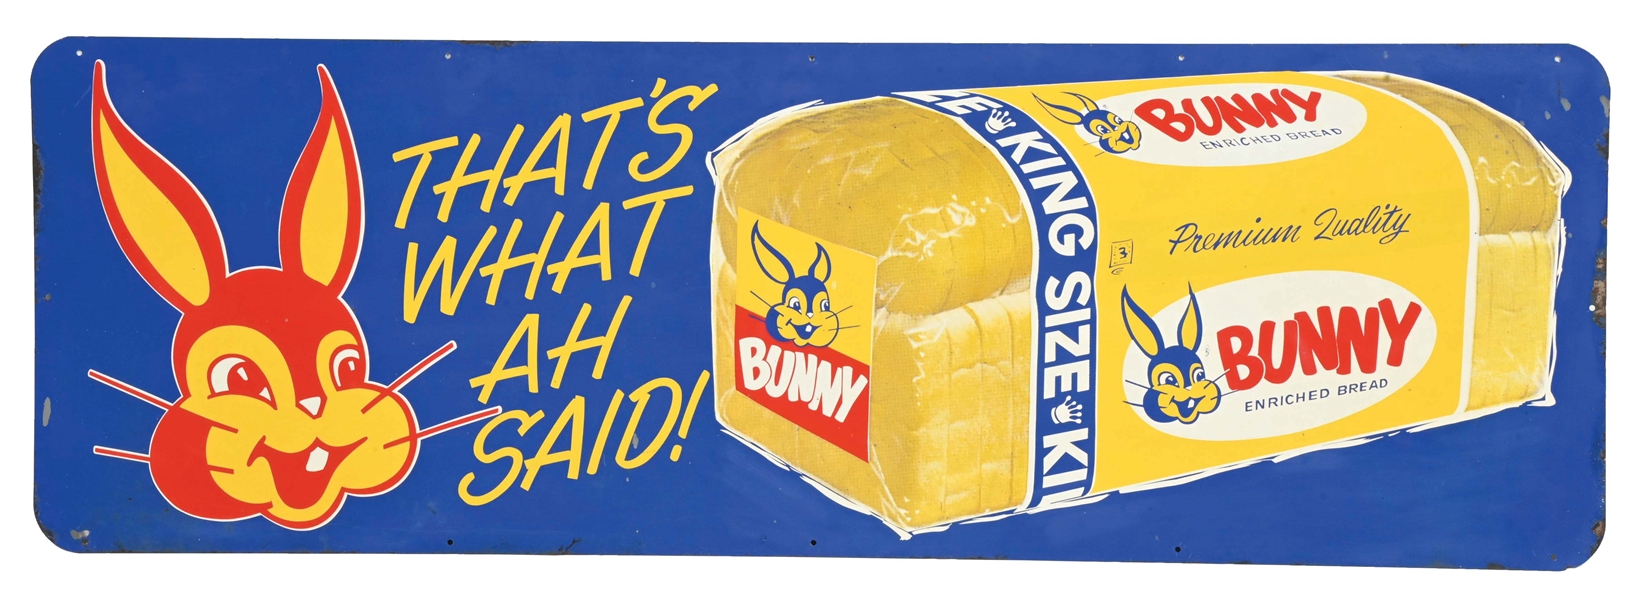 "THATS WHAT AH SAID!" BUNNY BREAD TIN SIGN W/ BUNNY & BREAD LOAF GRAPHIC.